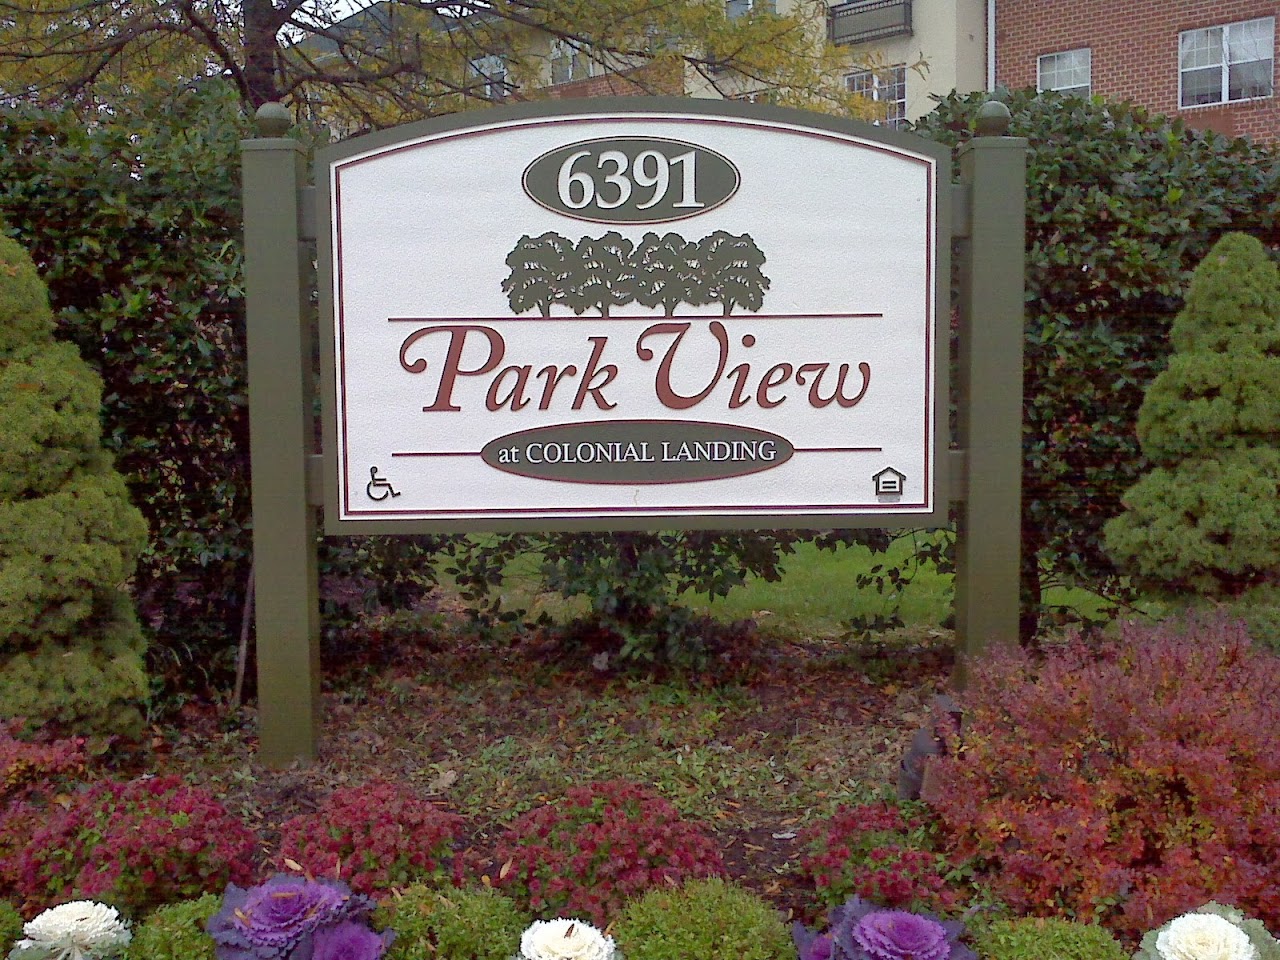 Photo of PARK VIEW AT COLONIAL LANDING. Affordable housing located at 6391 ROWANBERRY DR ELKRIDGE, MD 21075